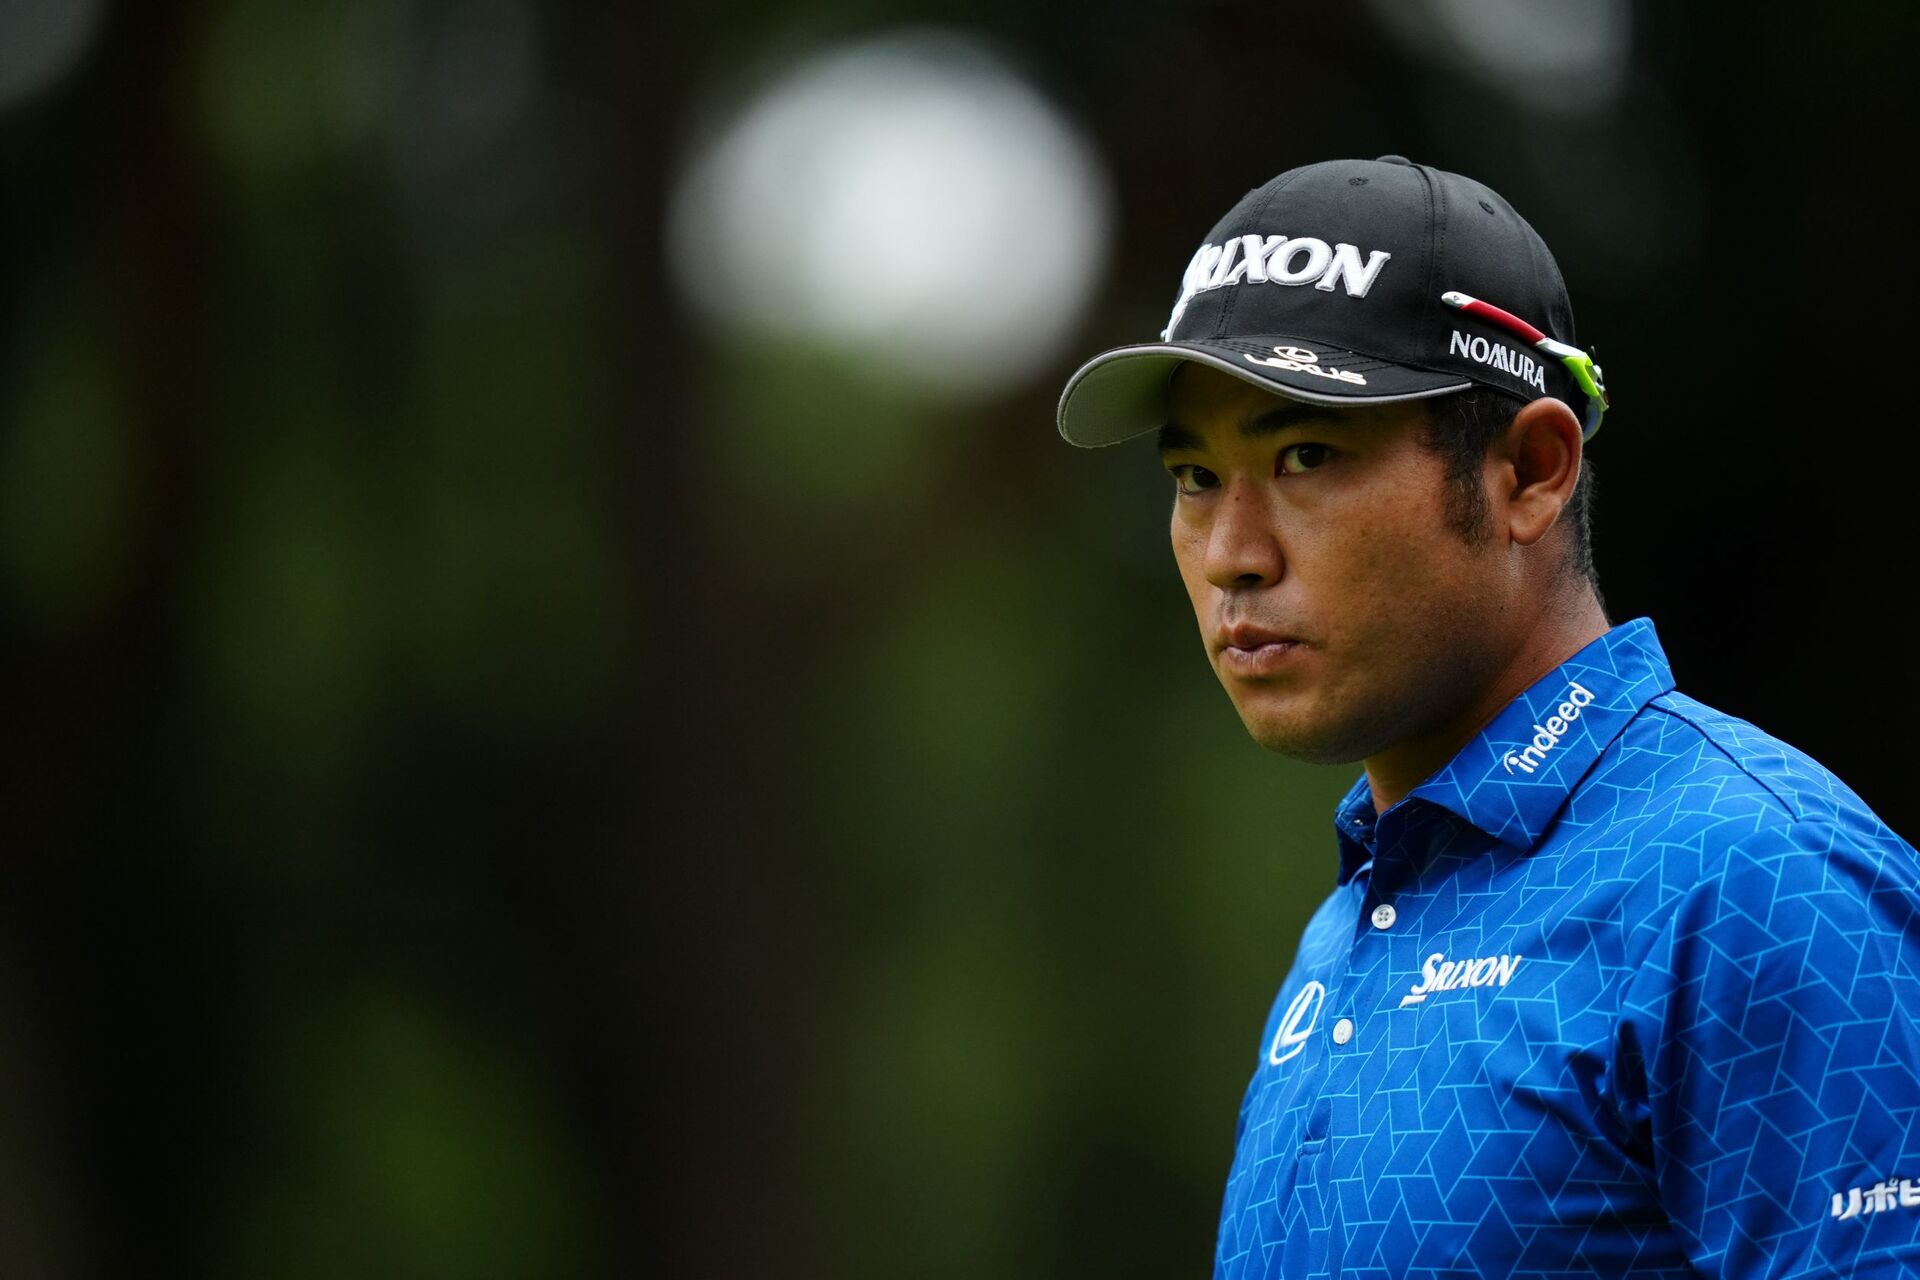 Matsuyama comes up short in Sony Open title defence